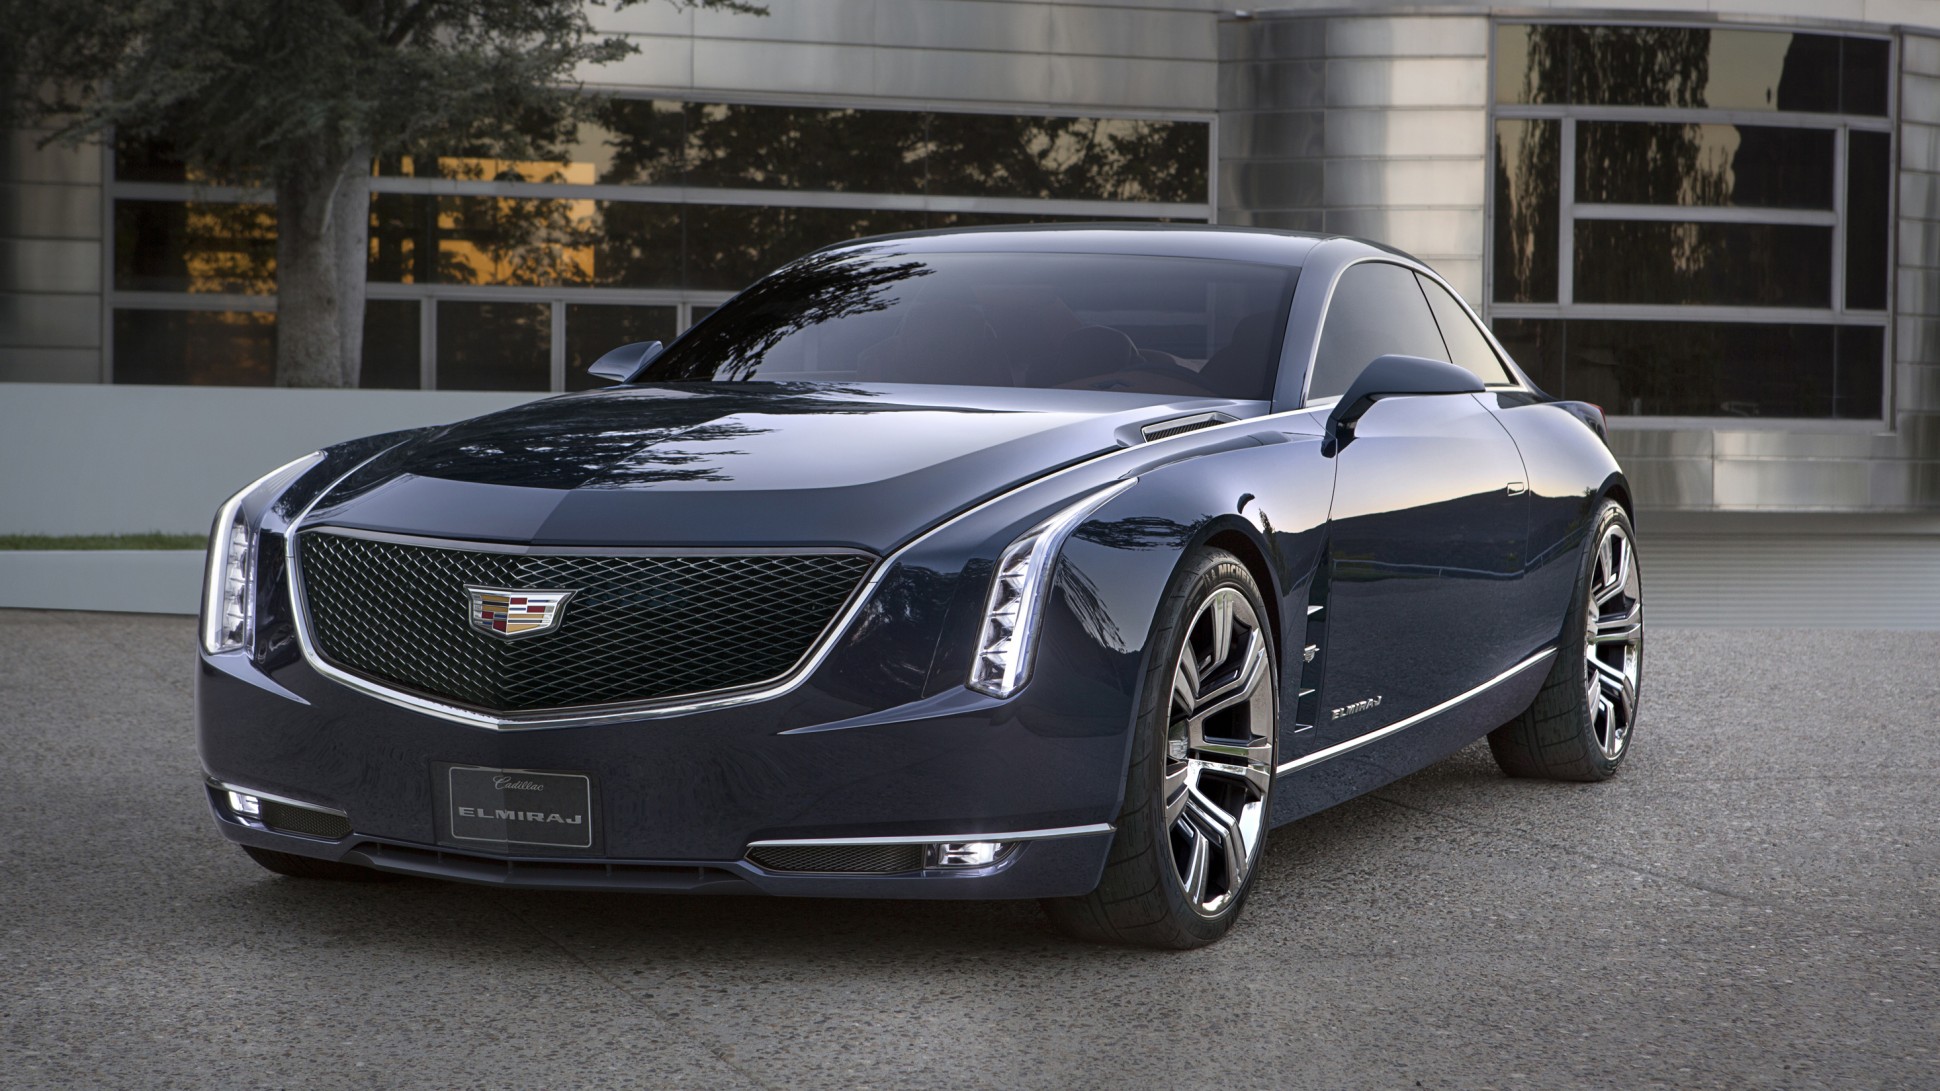 General Motors is hoping to boost its profits by expanding Cadillac's luxury …